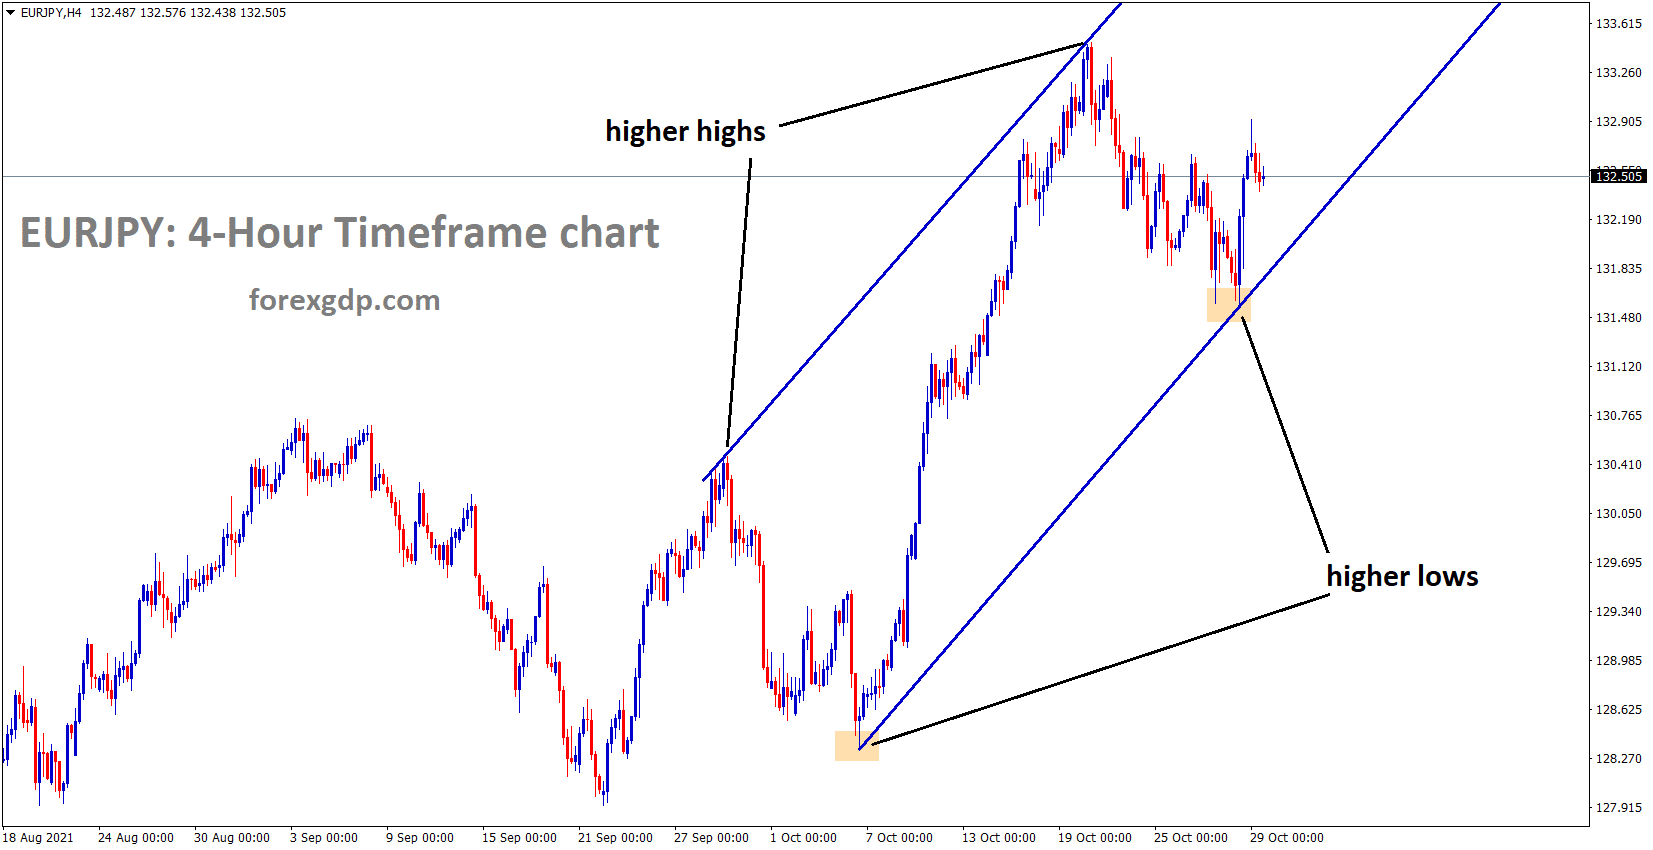 EURJPY is moving in an Ascending channel and the Market Has rebounded from a Higher low area